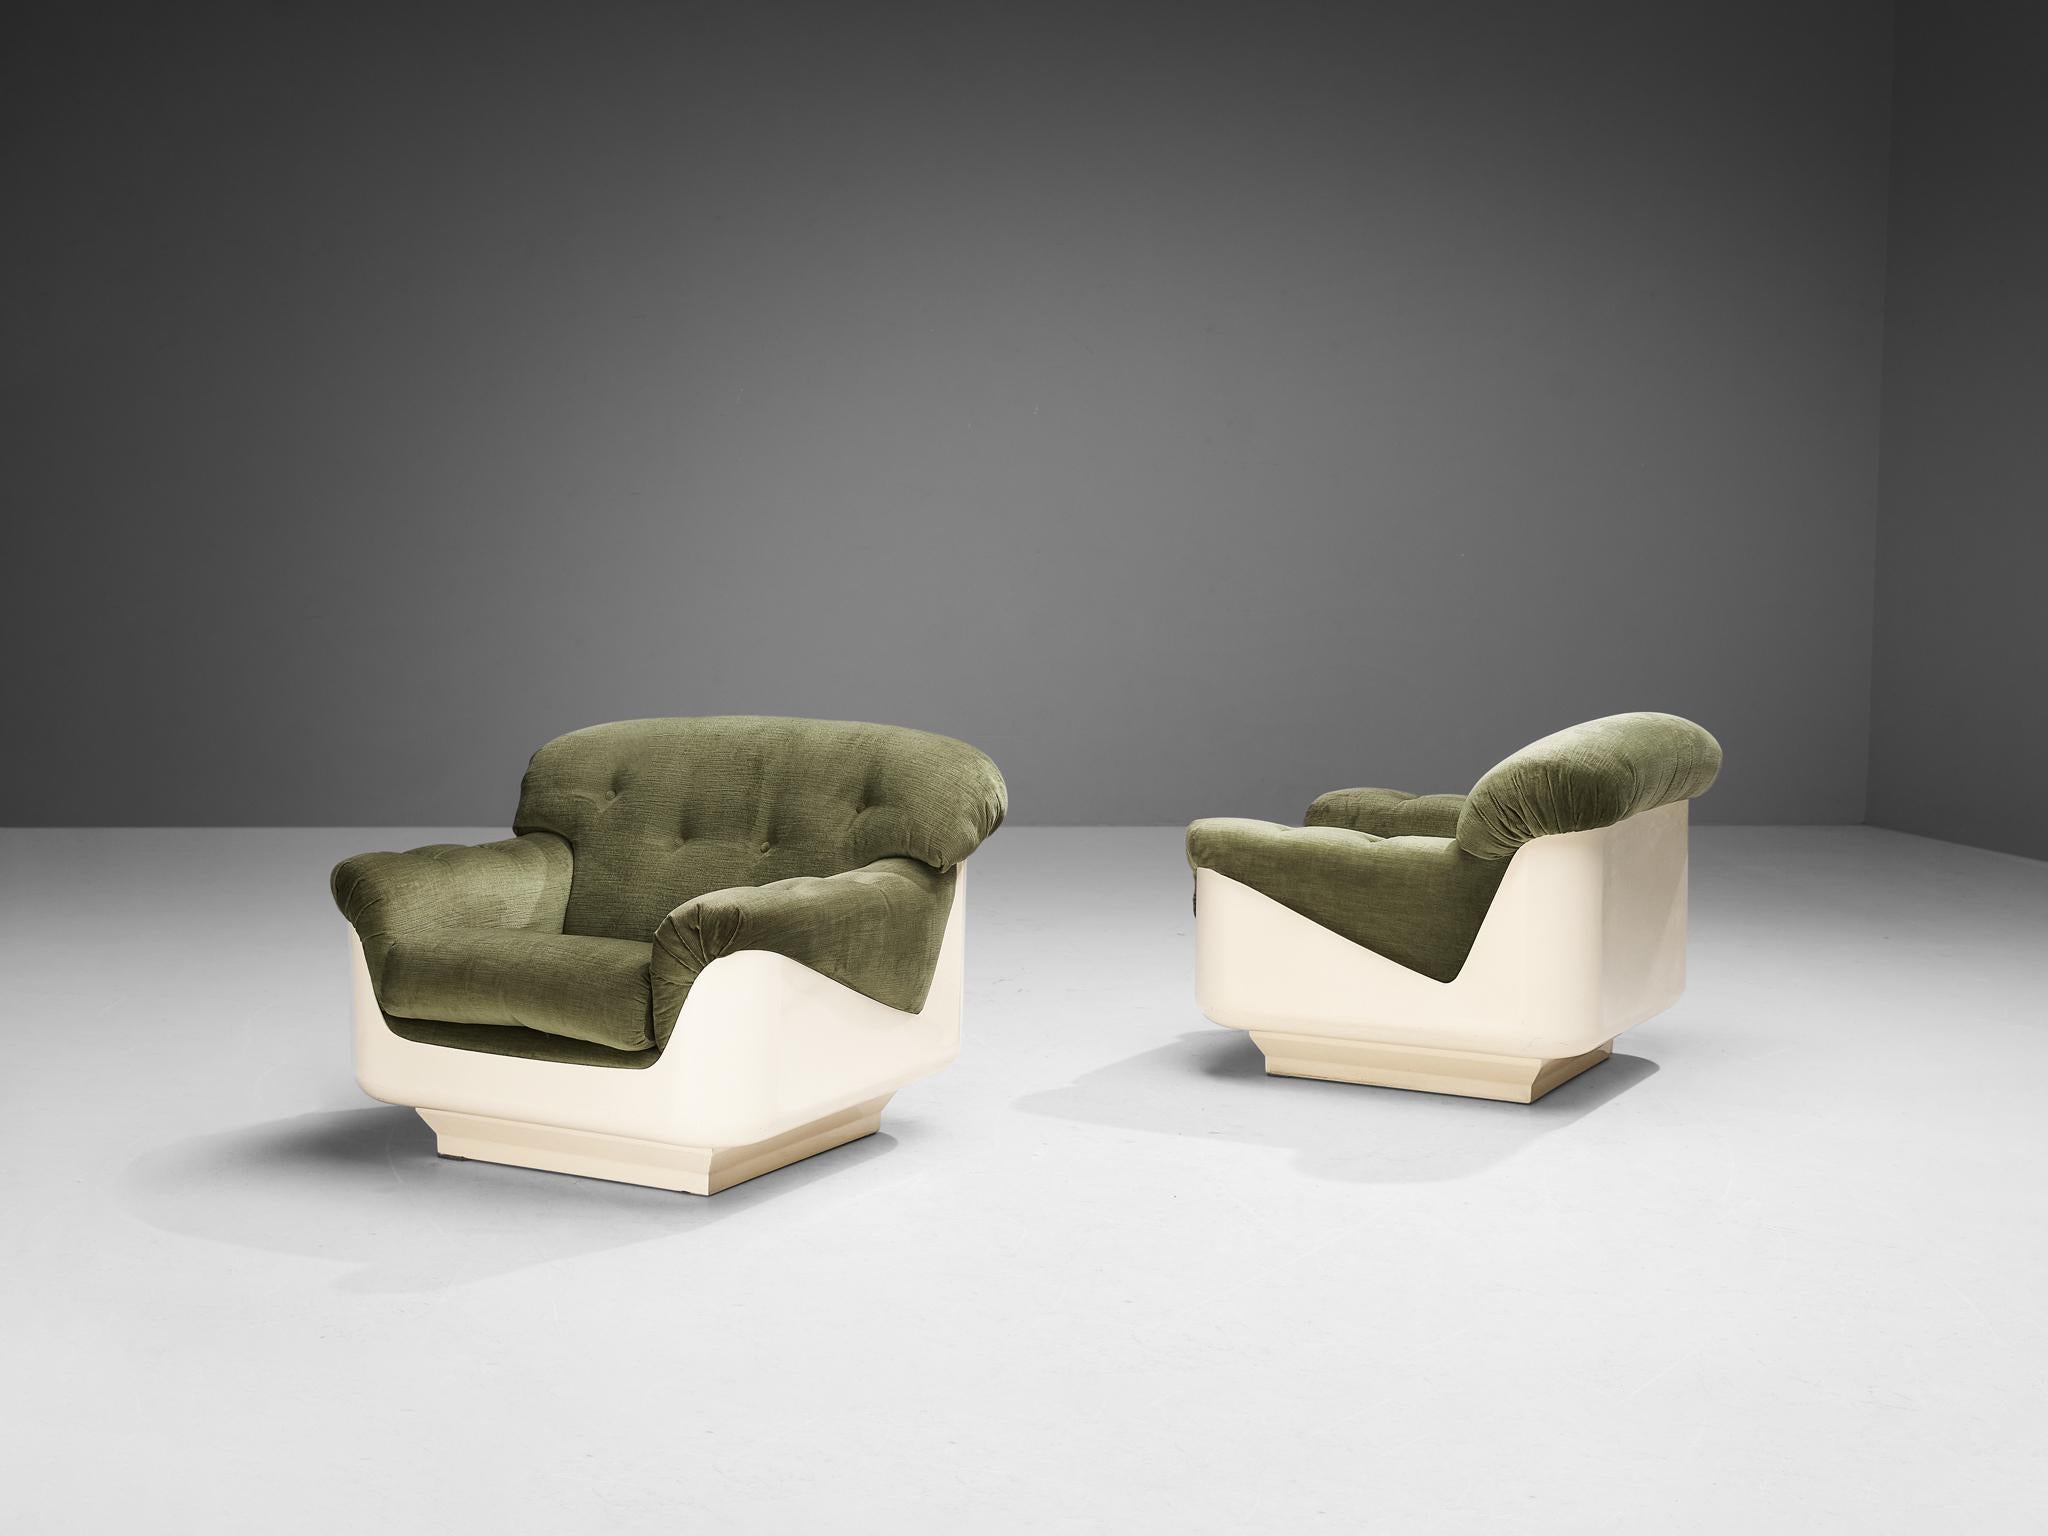 Jorge Zalszupin, pair of lounge chairs, fiberglass, velvet, Brazil, 1960s

This rare design by Brazilian master Jorge Zalszupin put emphasize on combining functionality with an aesthetically pleasing layout for daily use. This particular model in